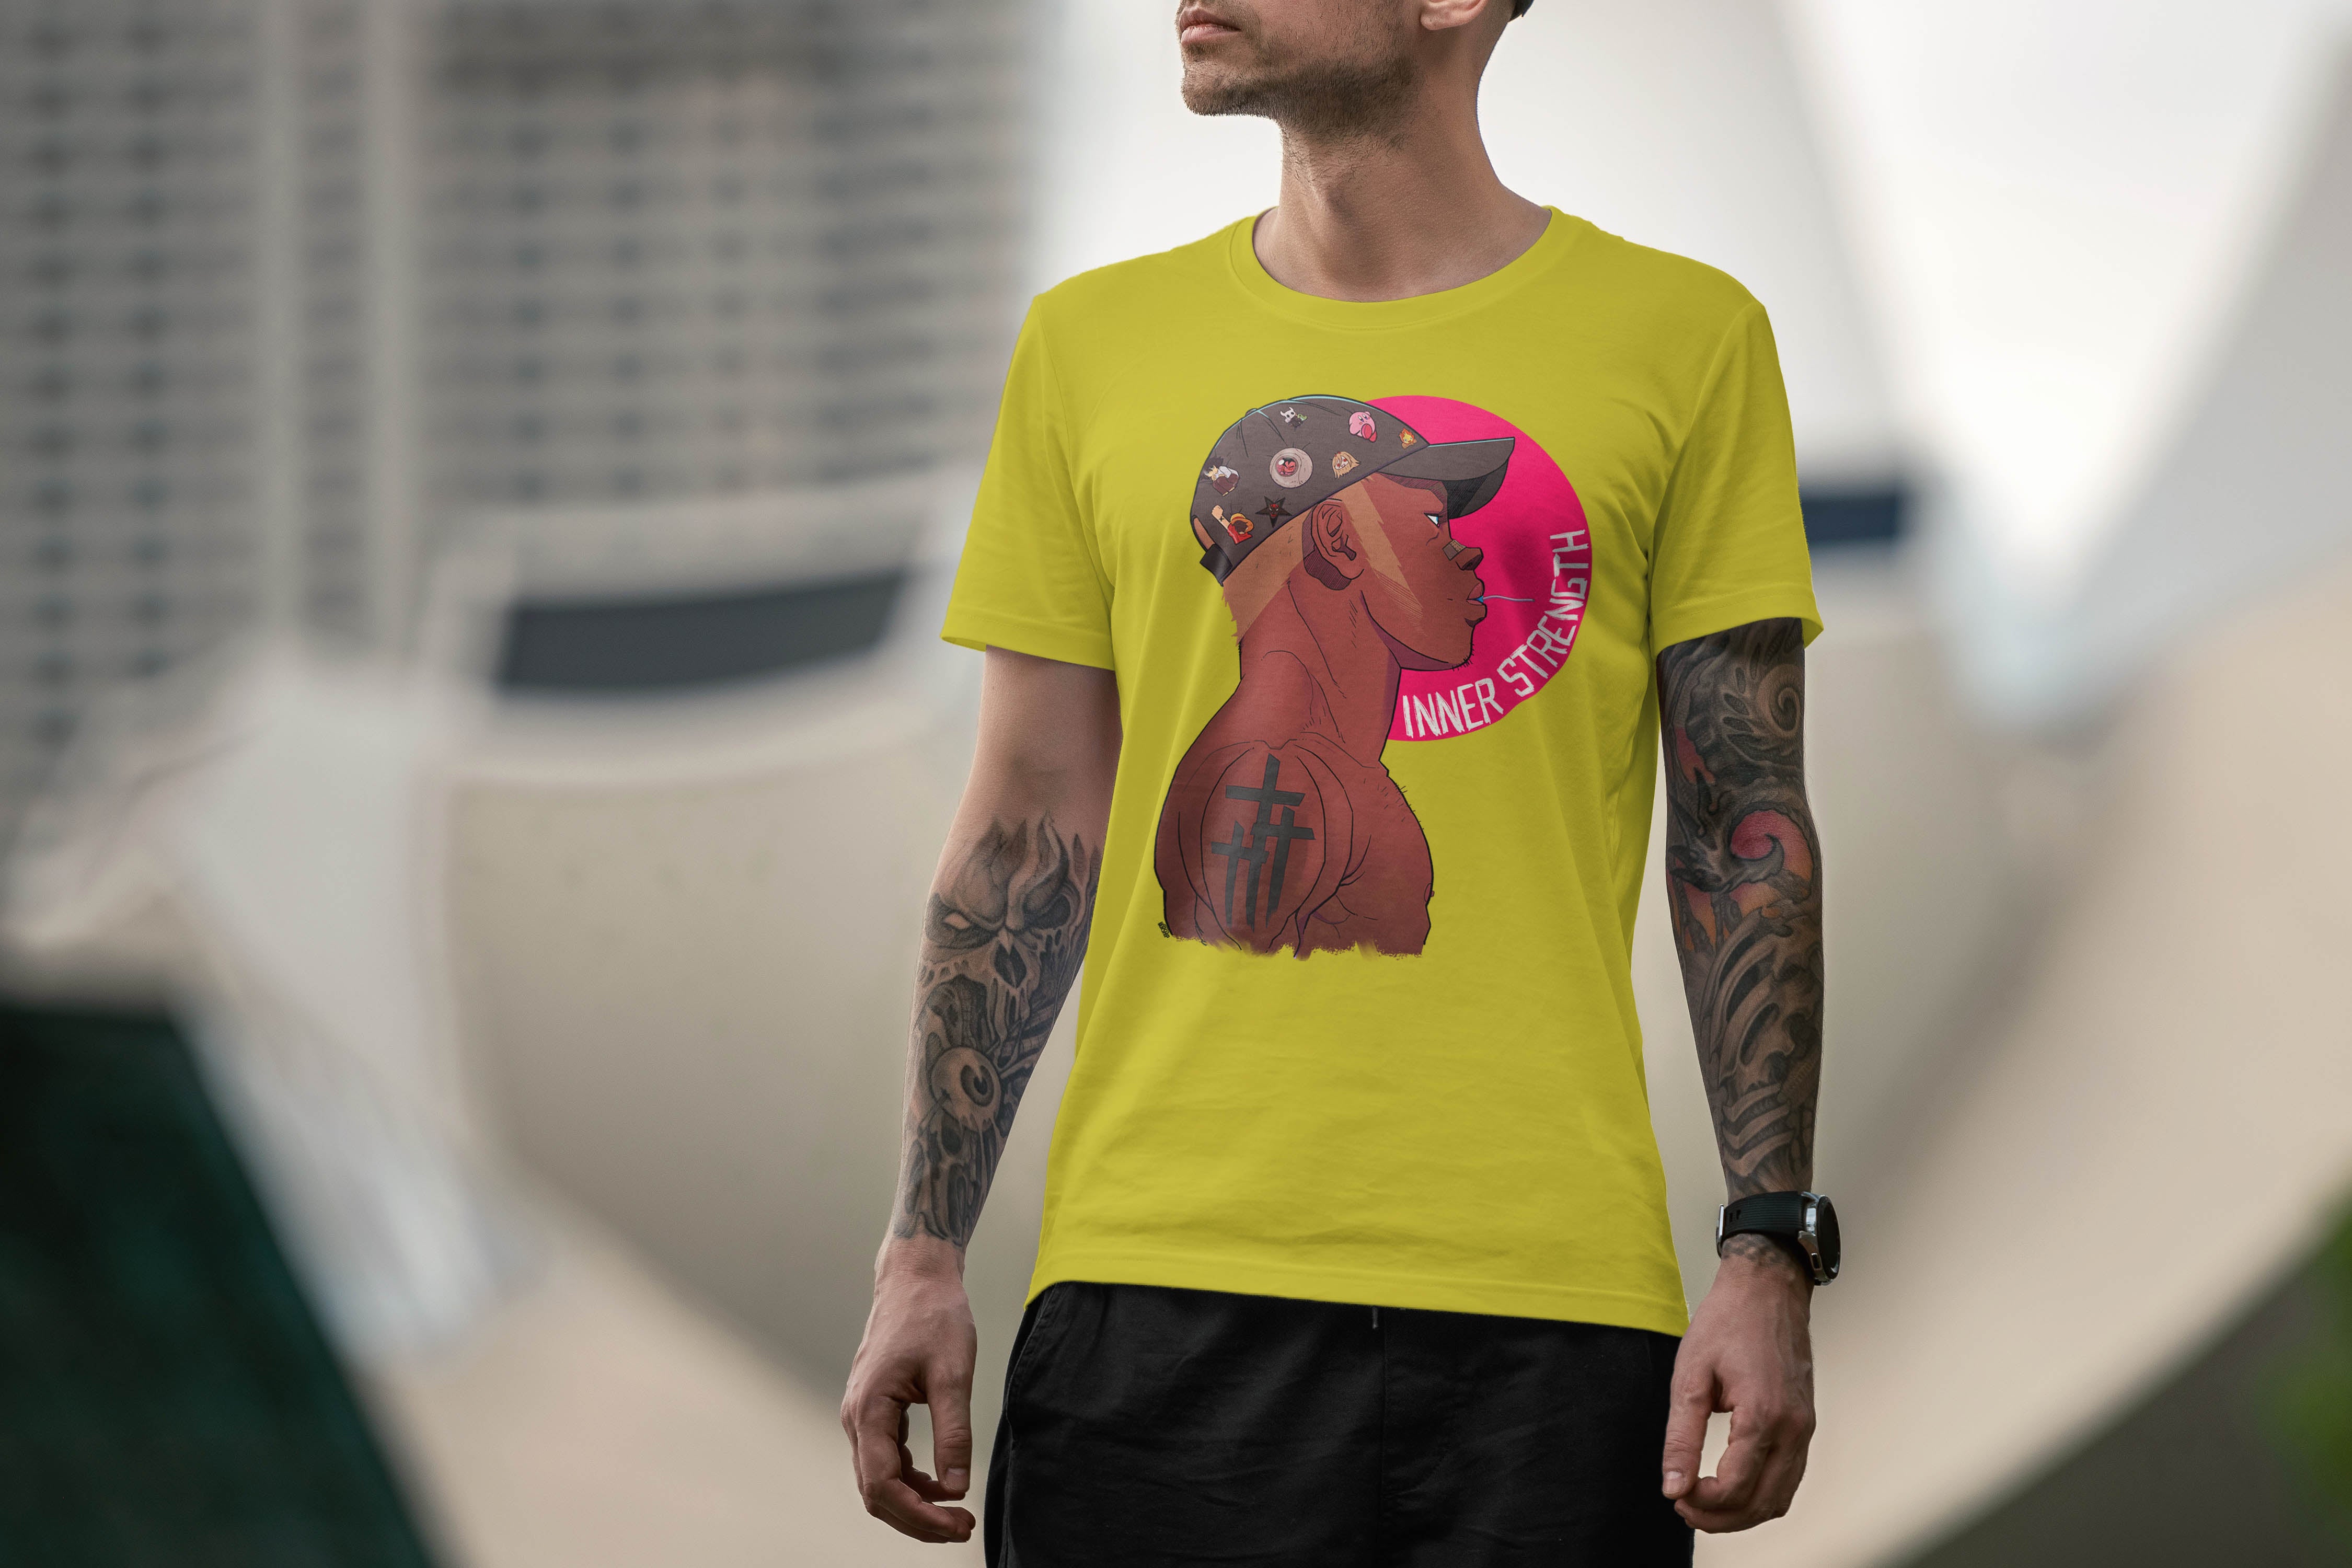 Unique and cool Gorillaz-style inner strength T-Shirt illustration